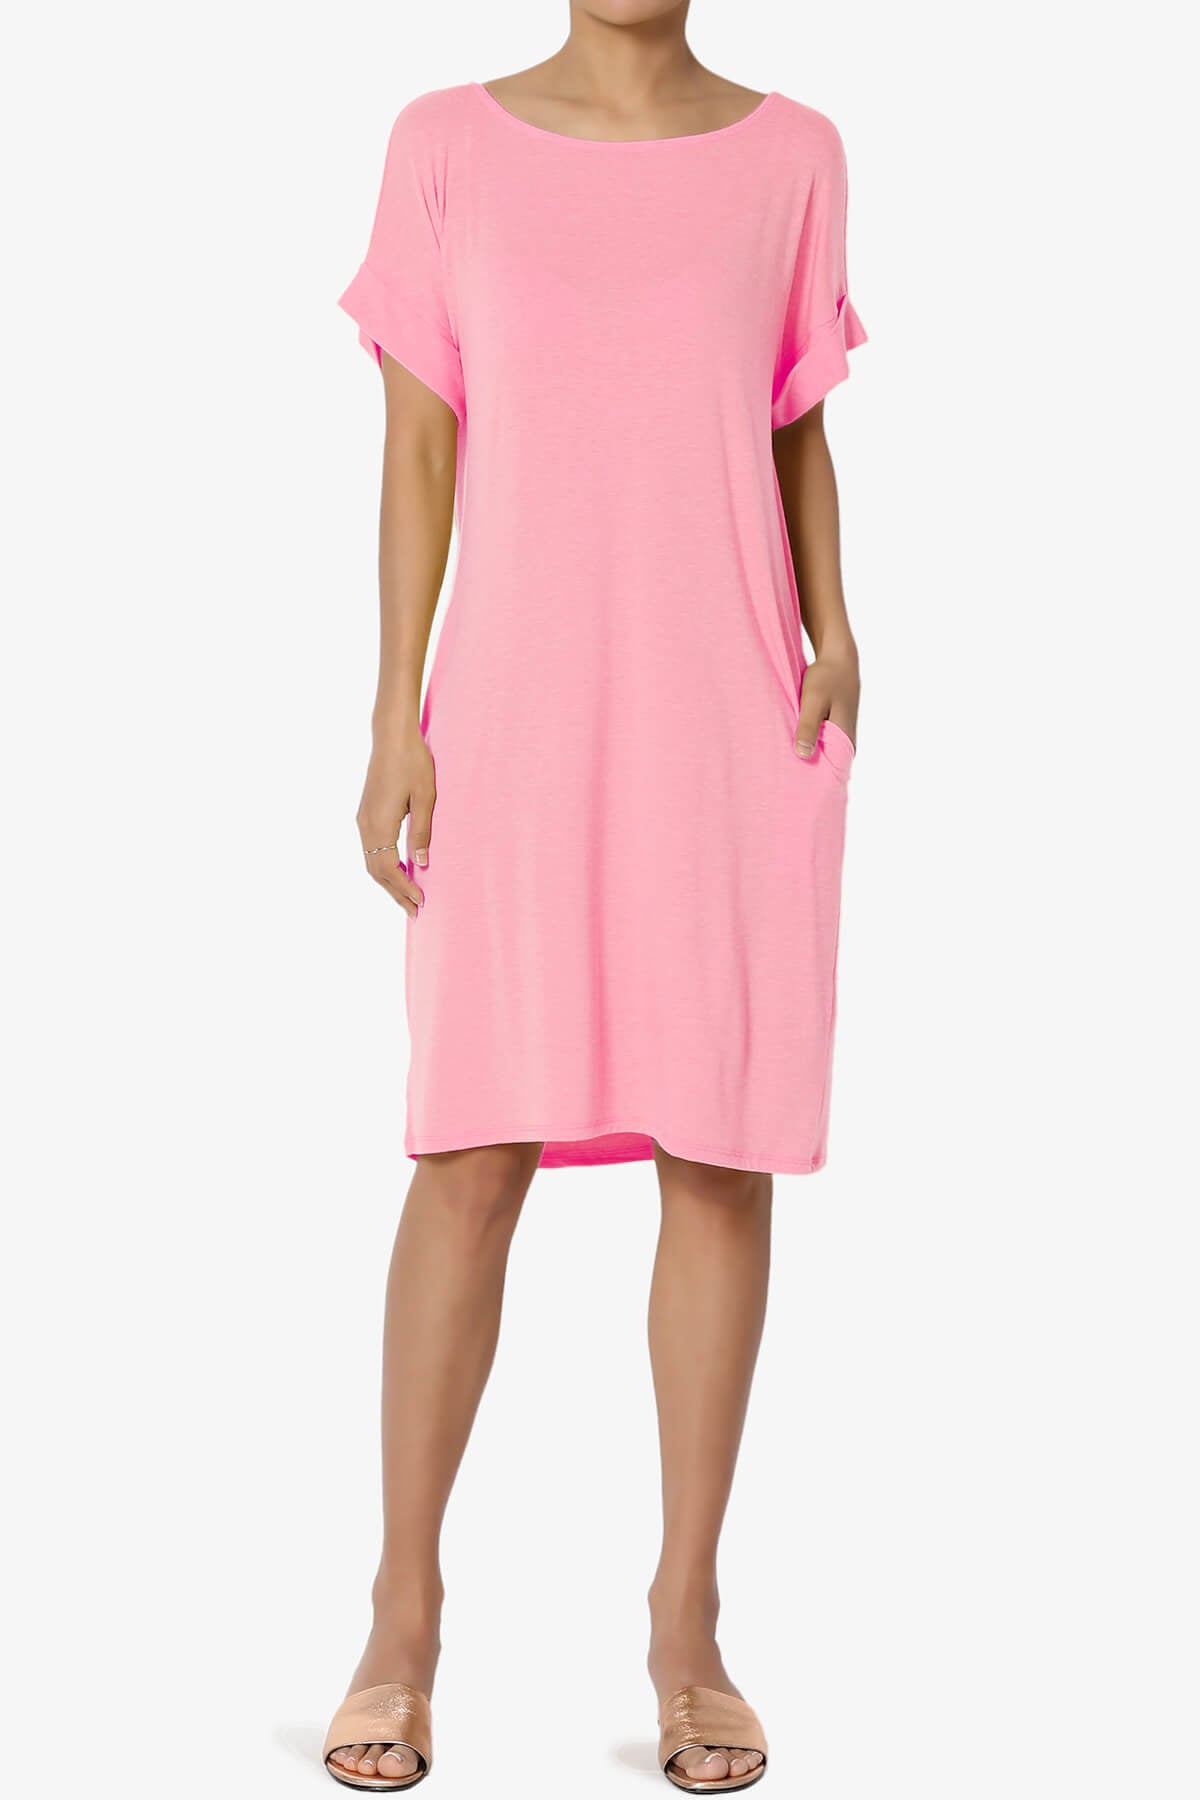 Load image into Gallery viewer, Janie Rolled Short Sleeve Round Neck Dress BRIGHT PINK_1
